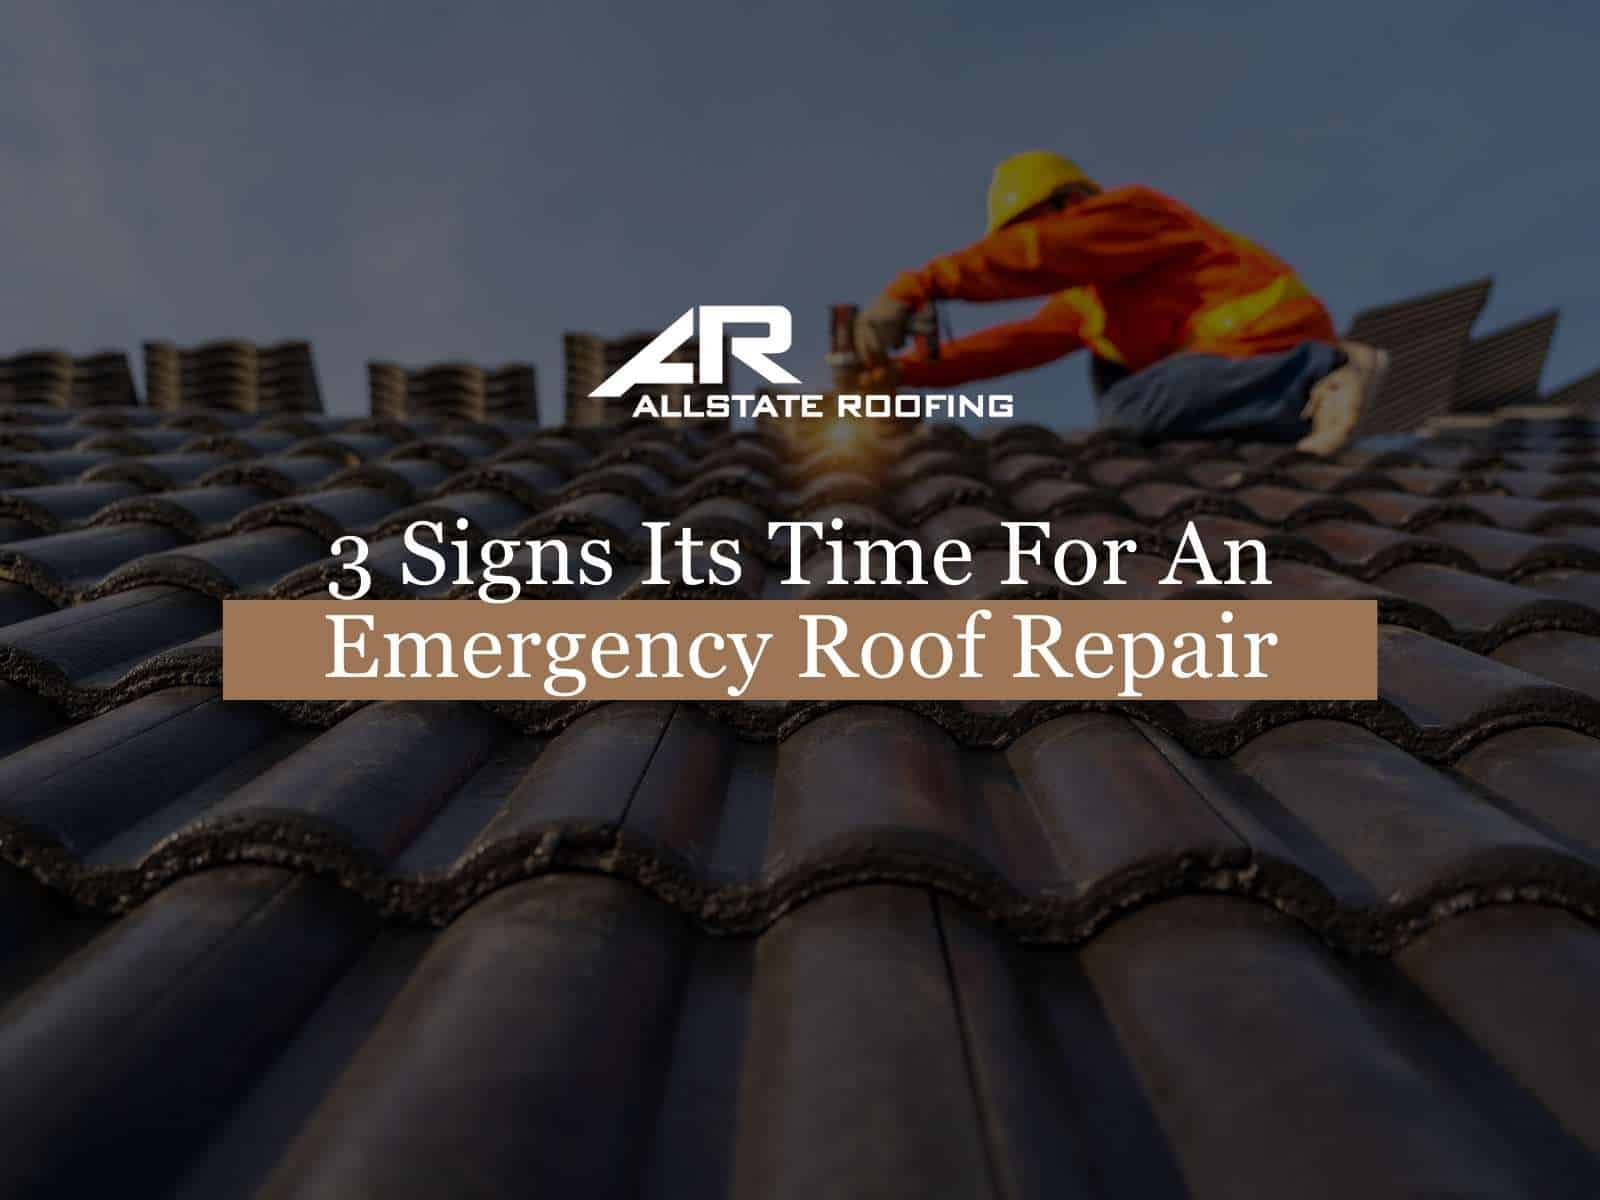 3 Signs Its Time For An Emergency Roof Repair